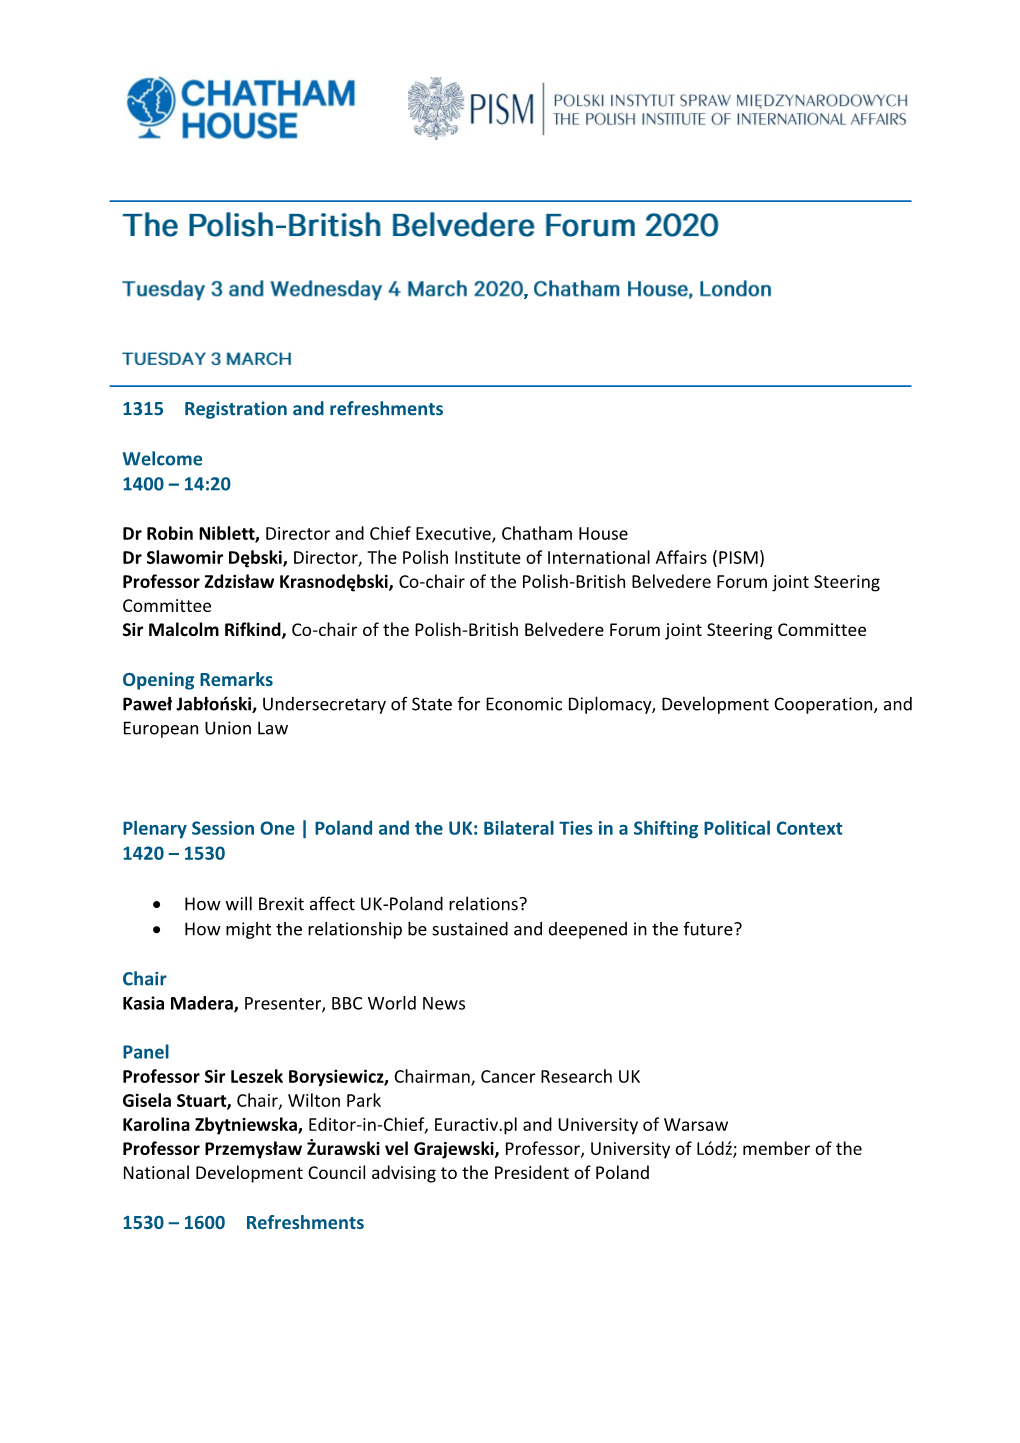 Poland and the UK: Bilateral Ties in a Shifting Political Context 1420 – 1530